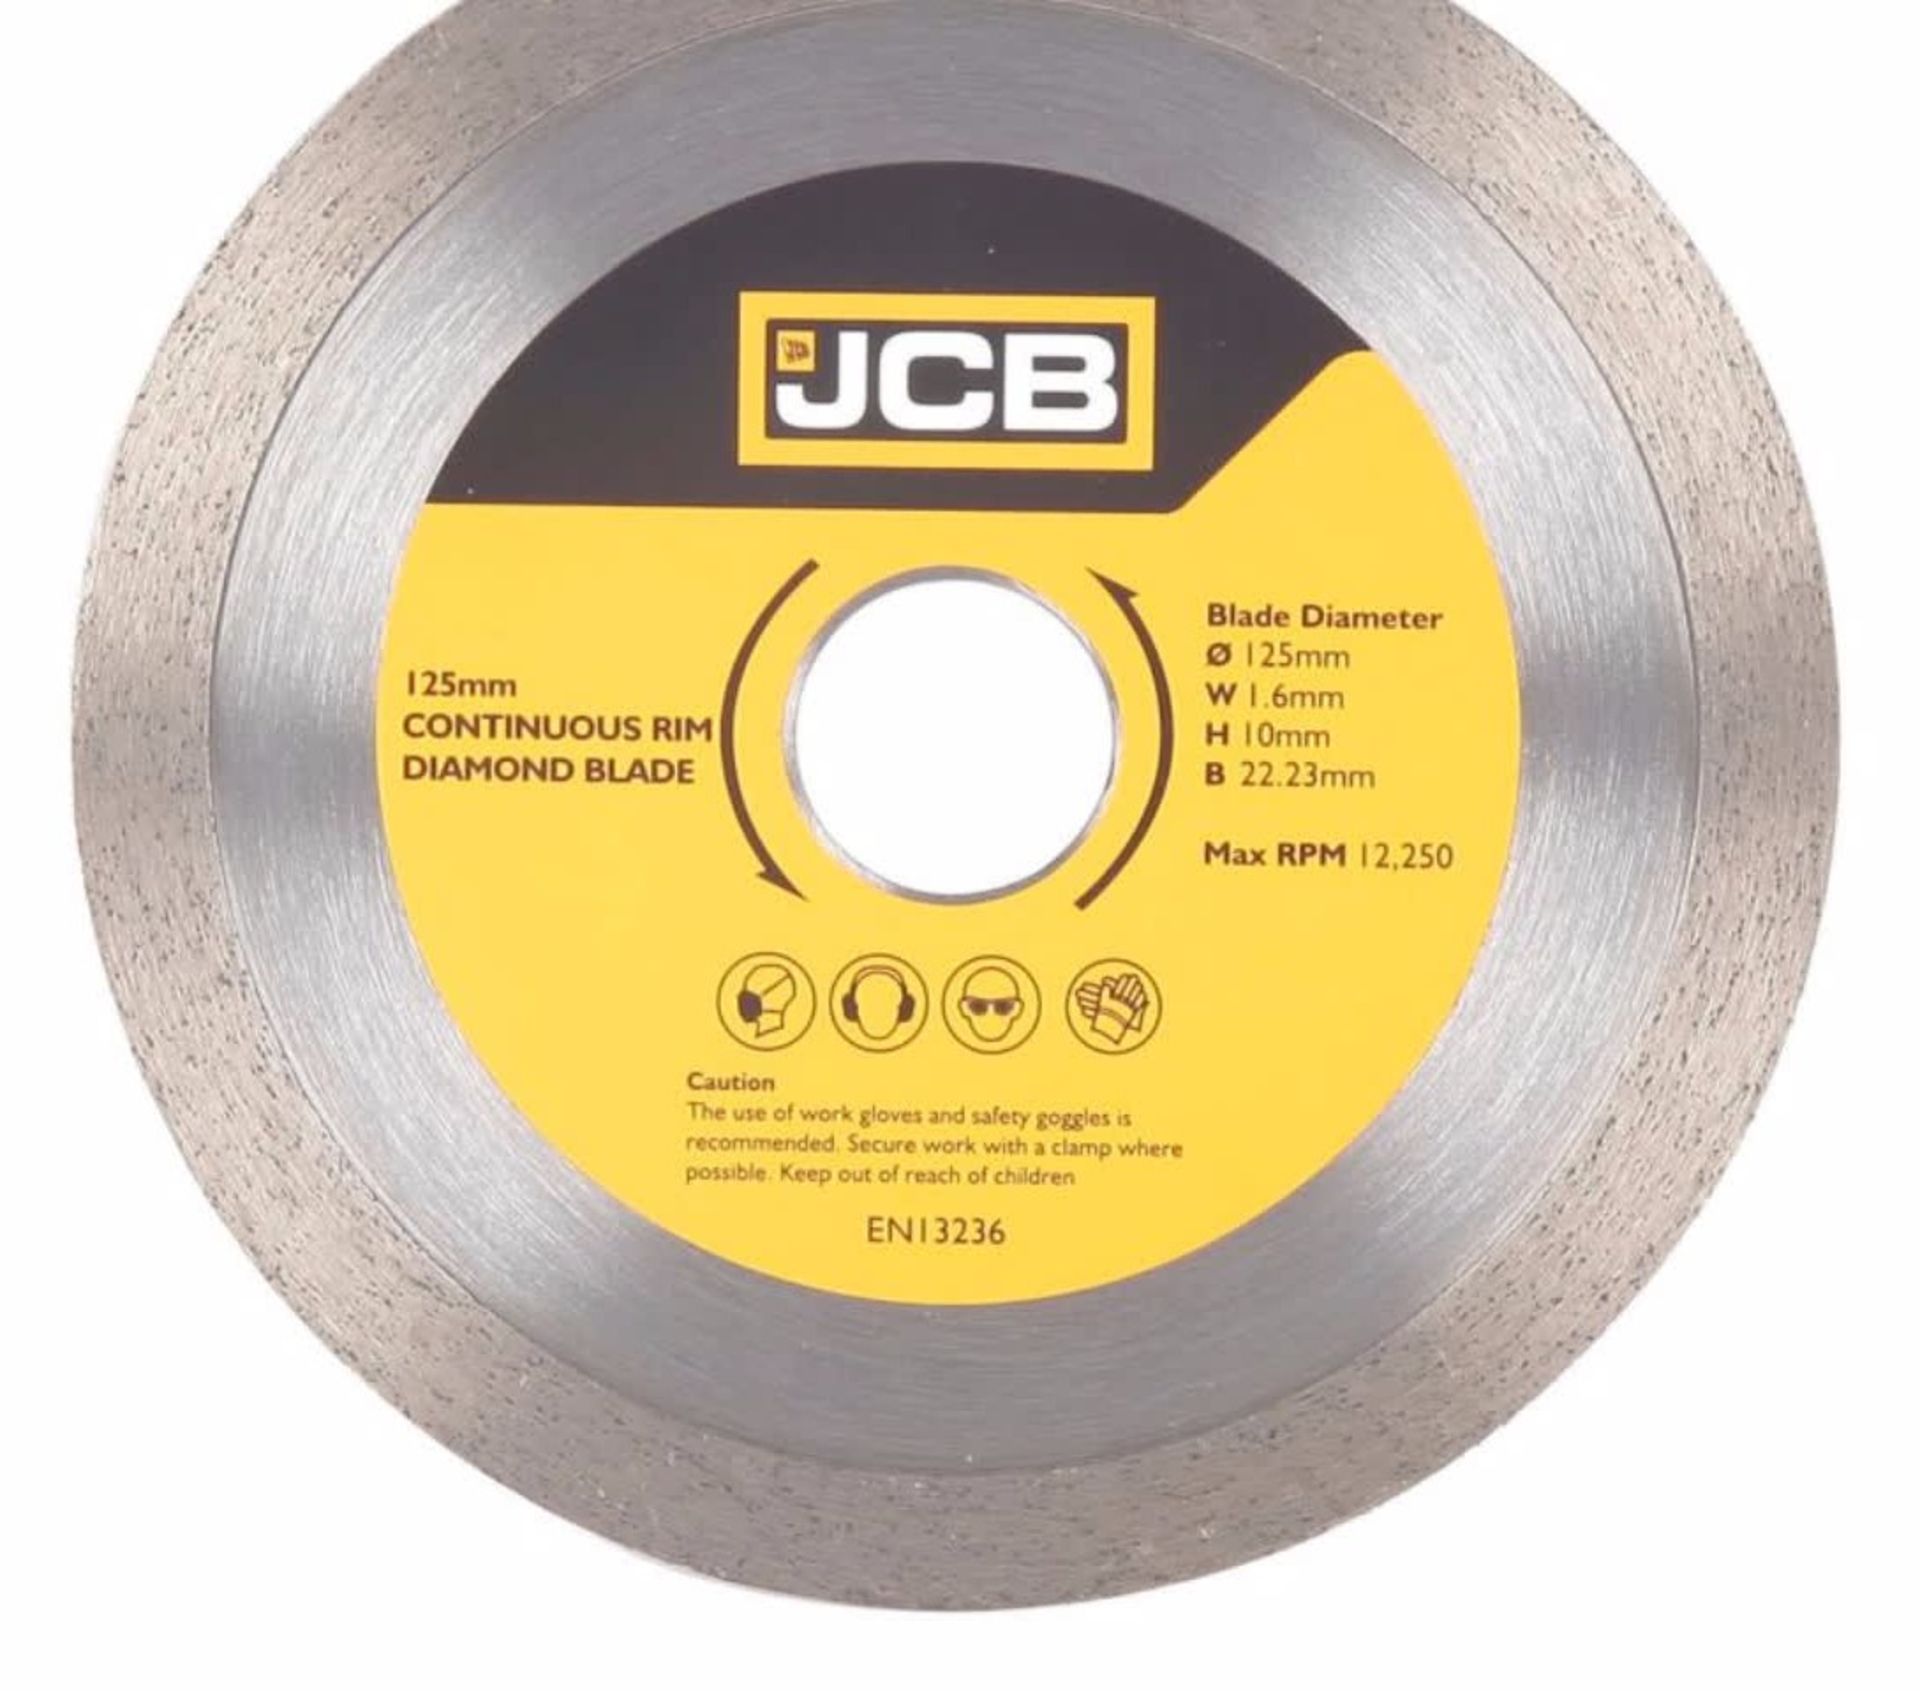 RRP £130.00 10 x CONTINUOUS RIM DIA BLADE 125mm RRP: £130.00 This JCB carbon steel diamond blade i - Image 2 of 2